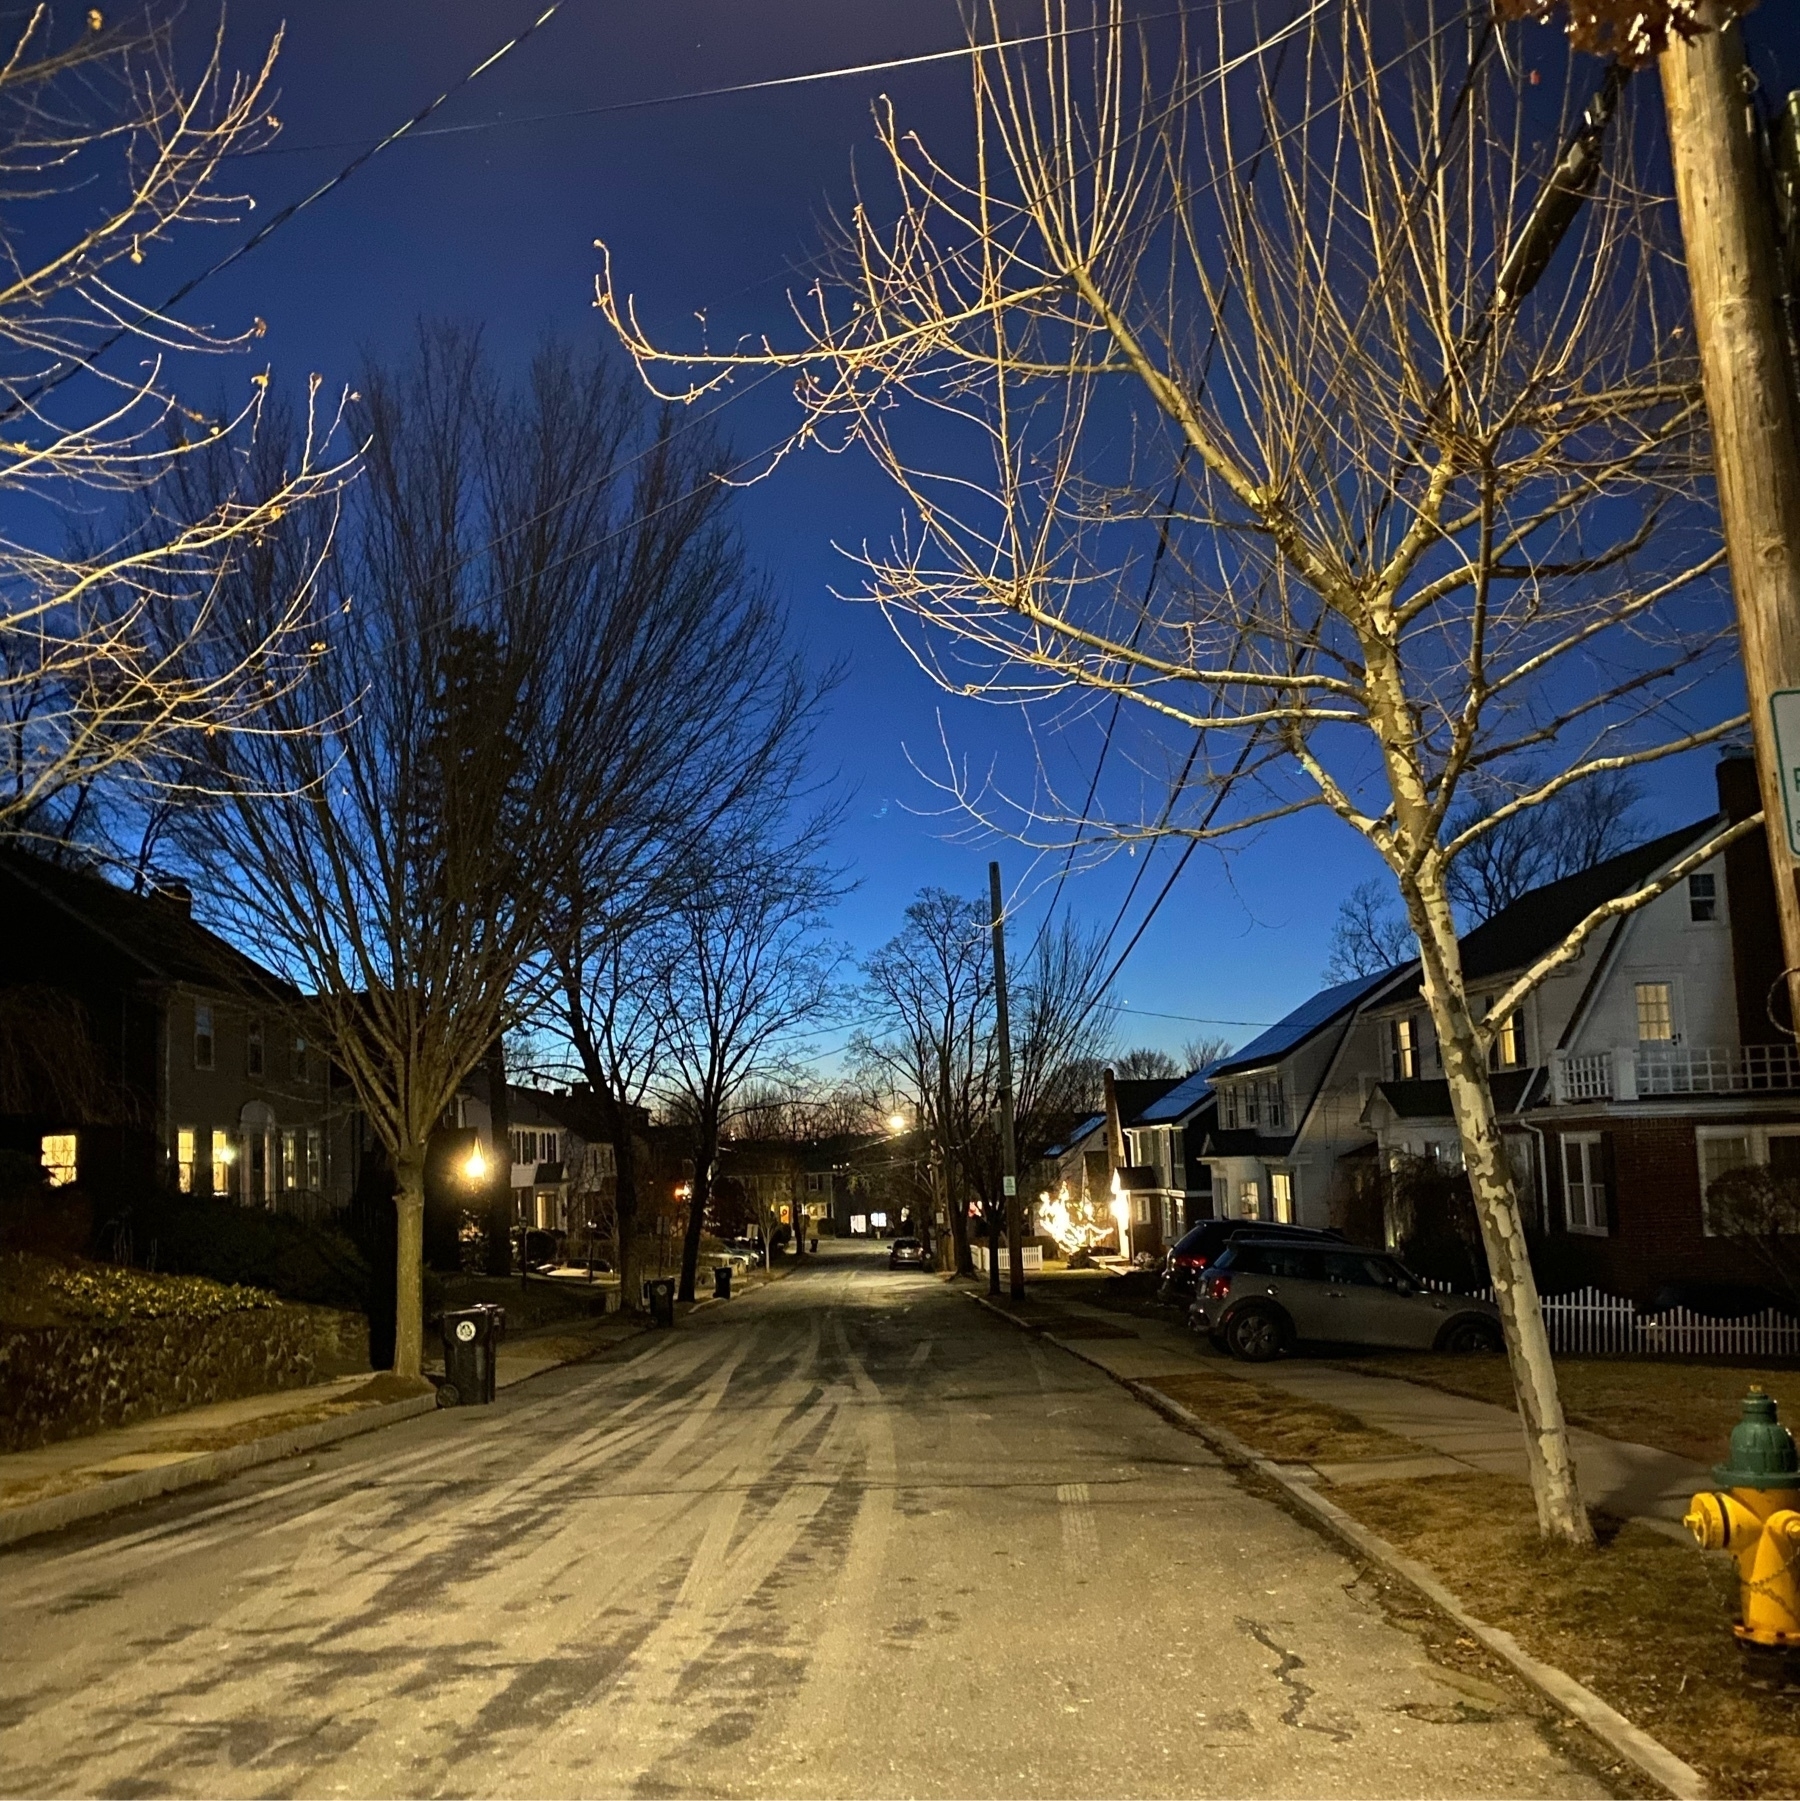 Street view in the evening illuminated by streetlights.